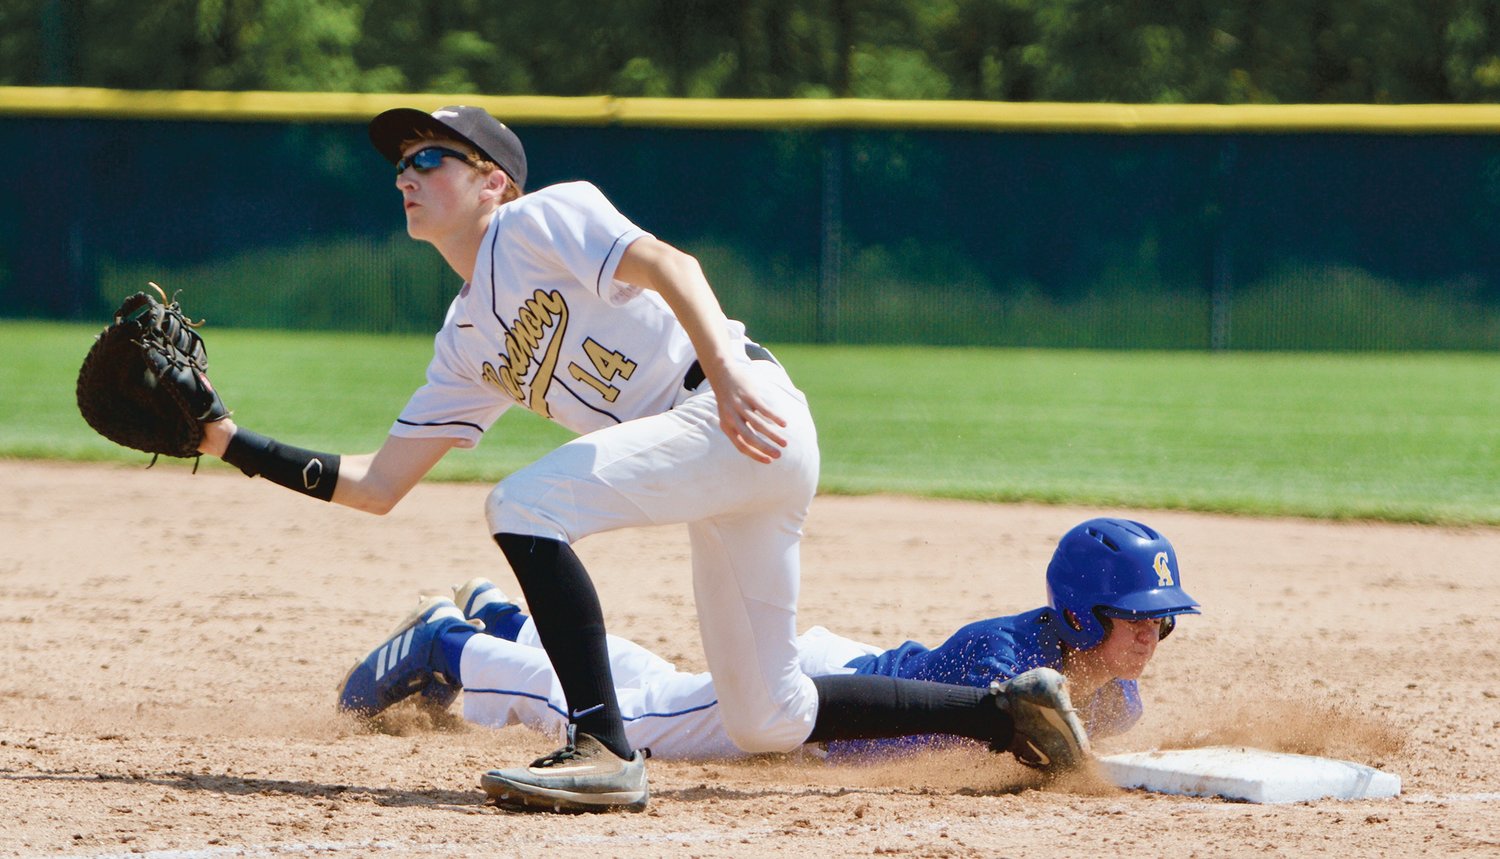 Austin Motz dives back in safely at first base during a sectional game against Lebanon in 2019.